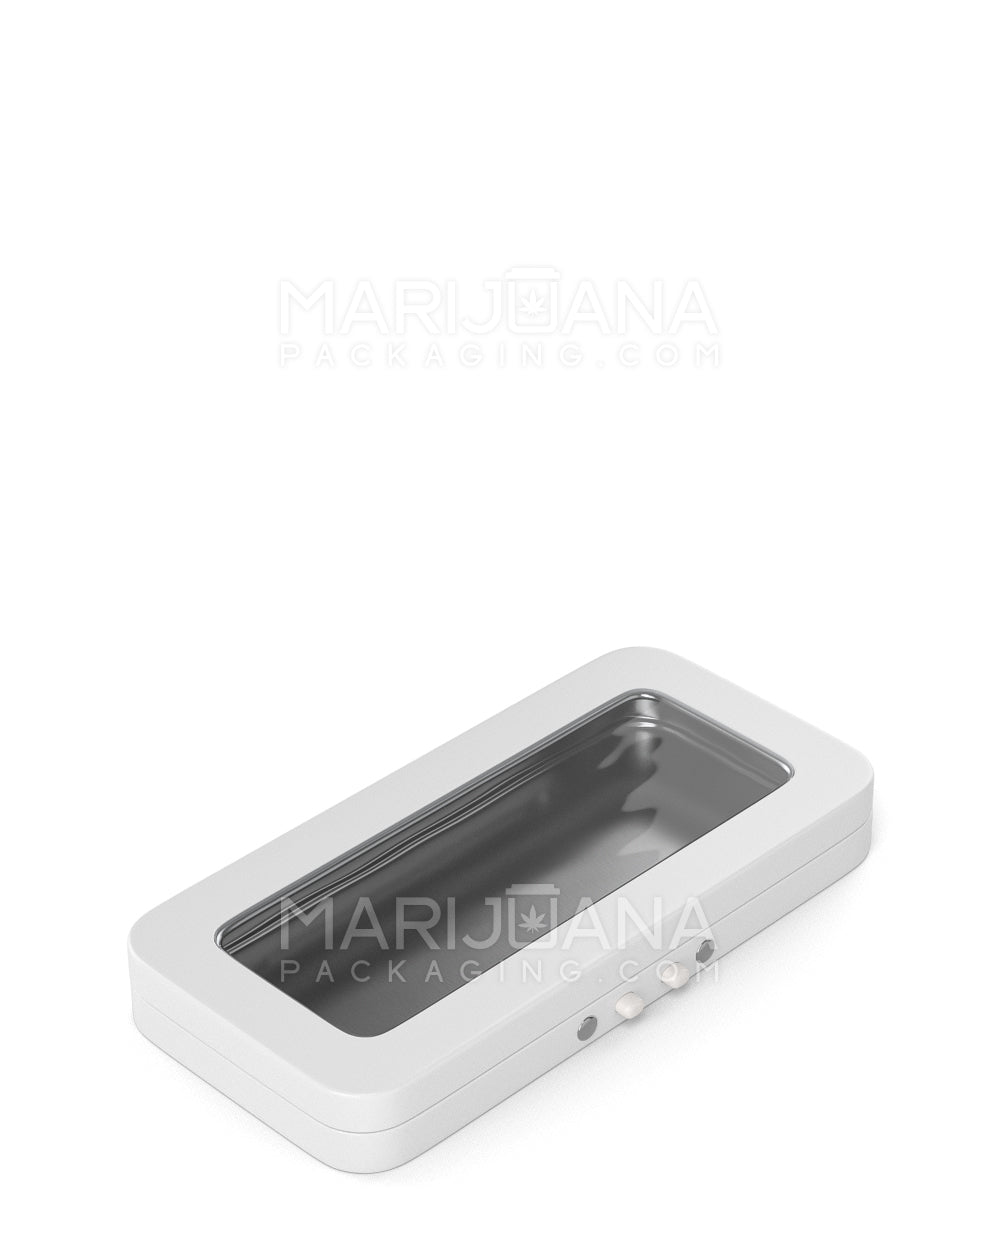 Child Resistant & Sustainable | Hinged-Lid Large Vista Edible & Joint Box w/ See-Through Window |  White Tin  - 4